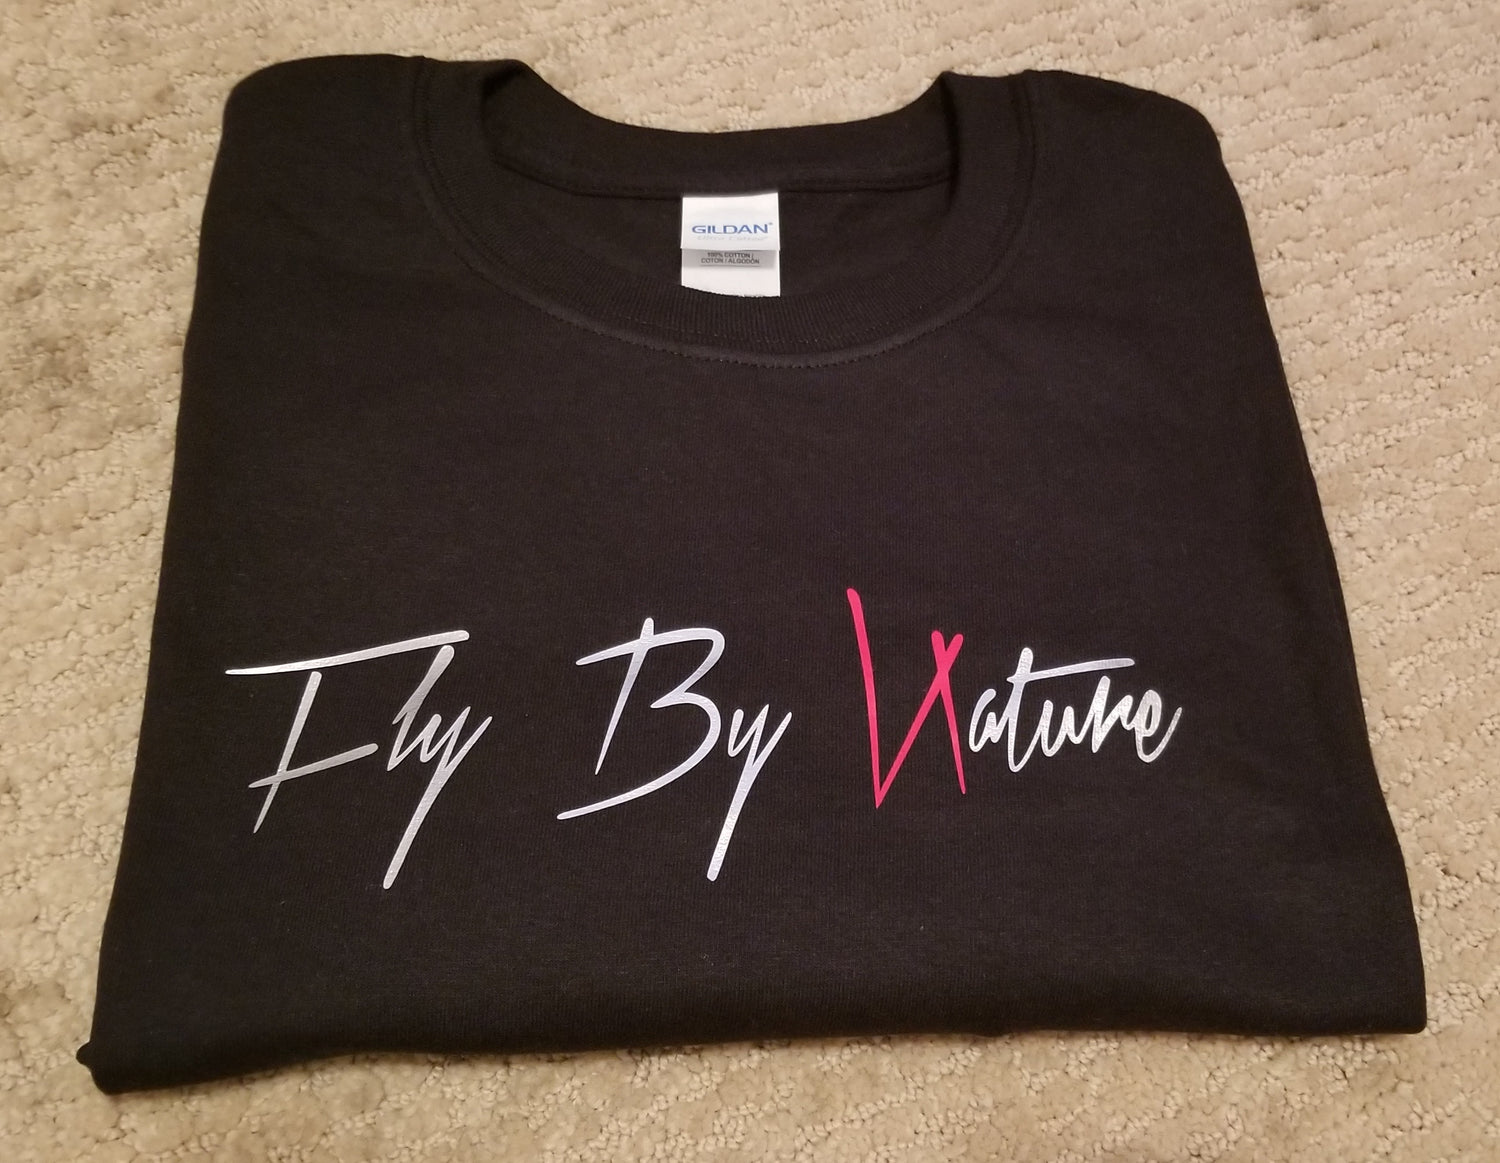 Fly by Nature Tshirt